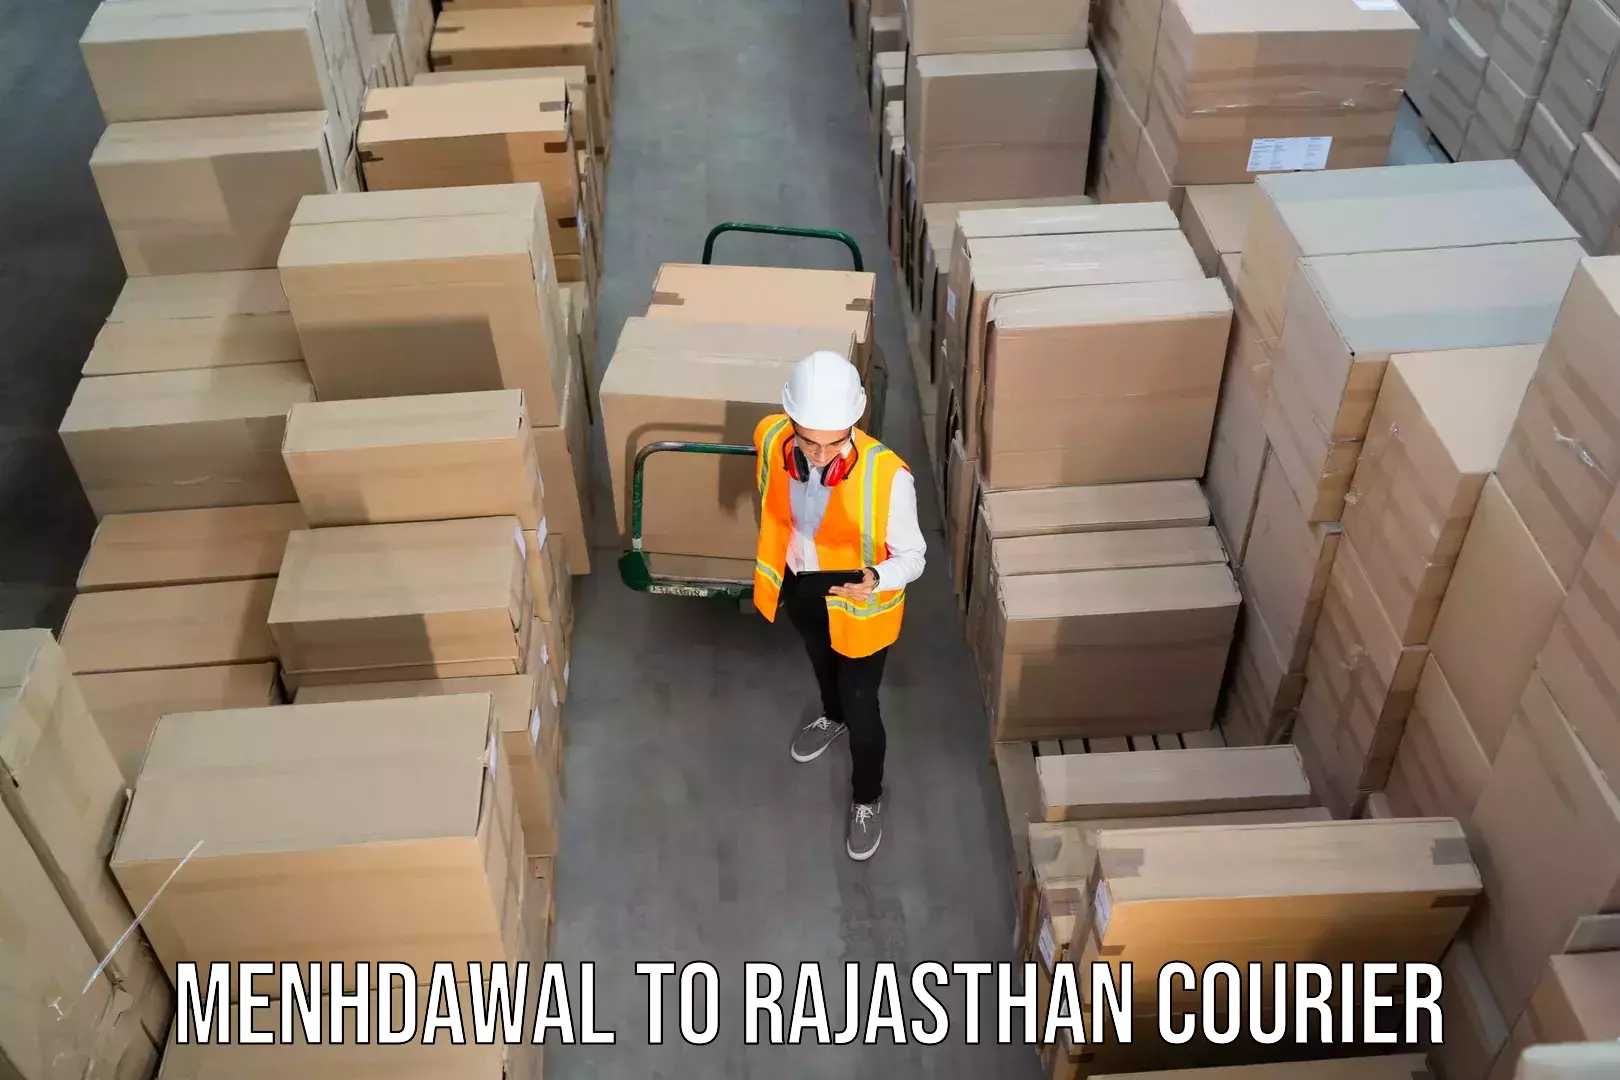 24/7 courier service Menhdawal to Udaipur